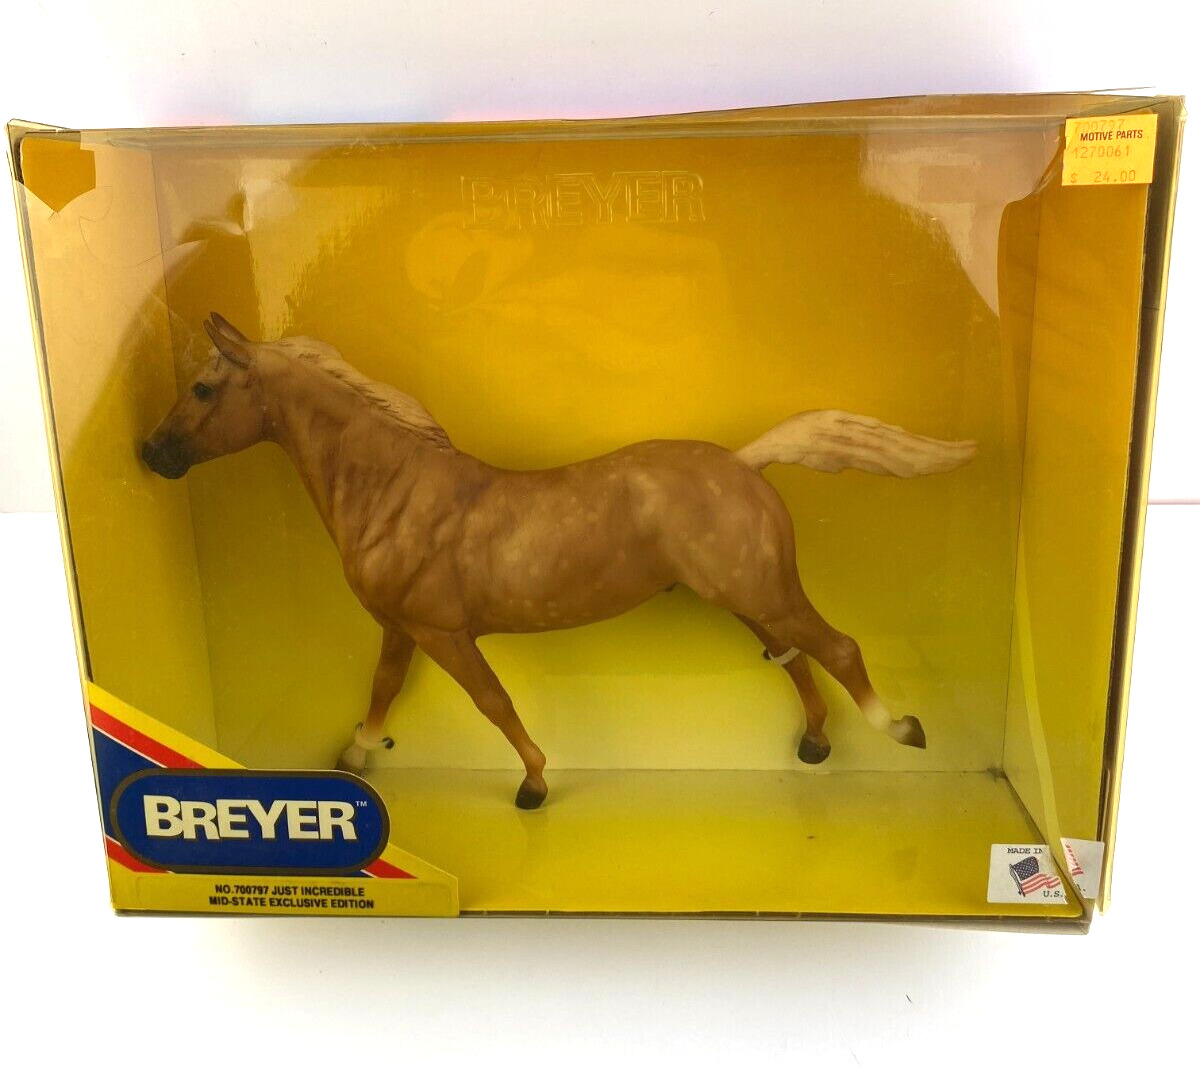 Breyer No. 700797 Just Incredible Dappled Palomino Mid State Exclusive Edition 